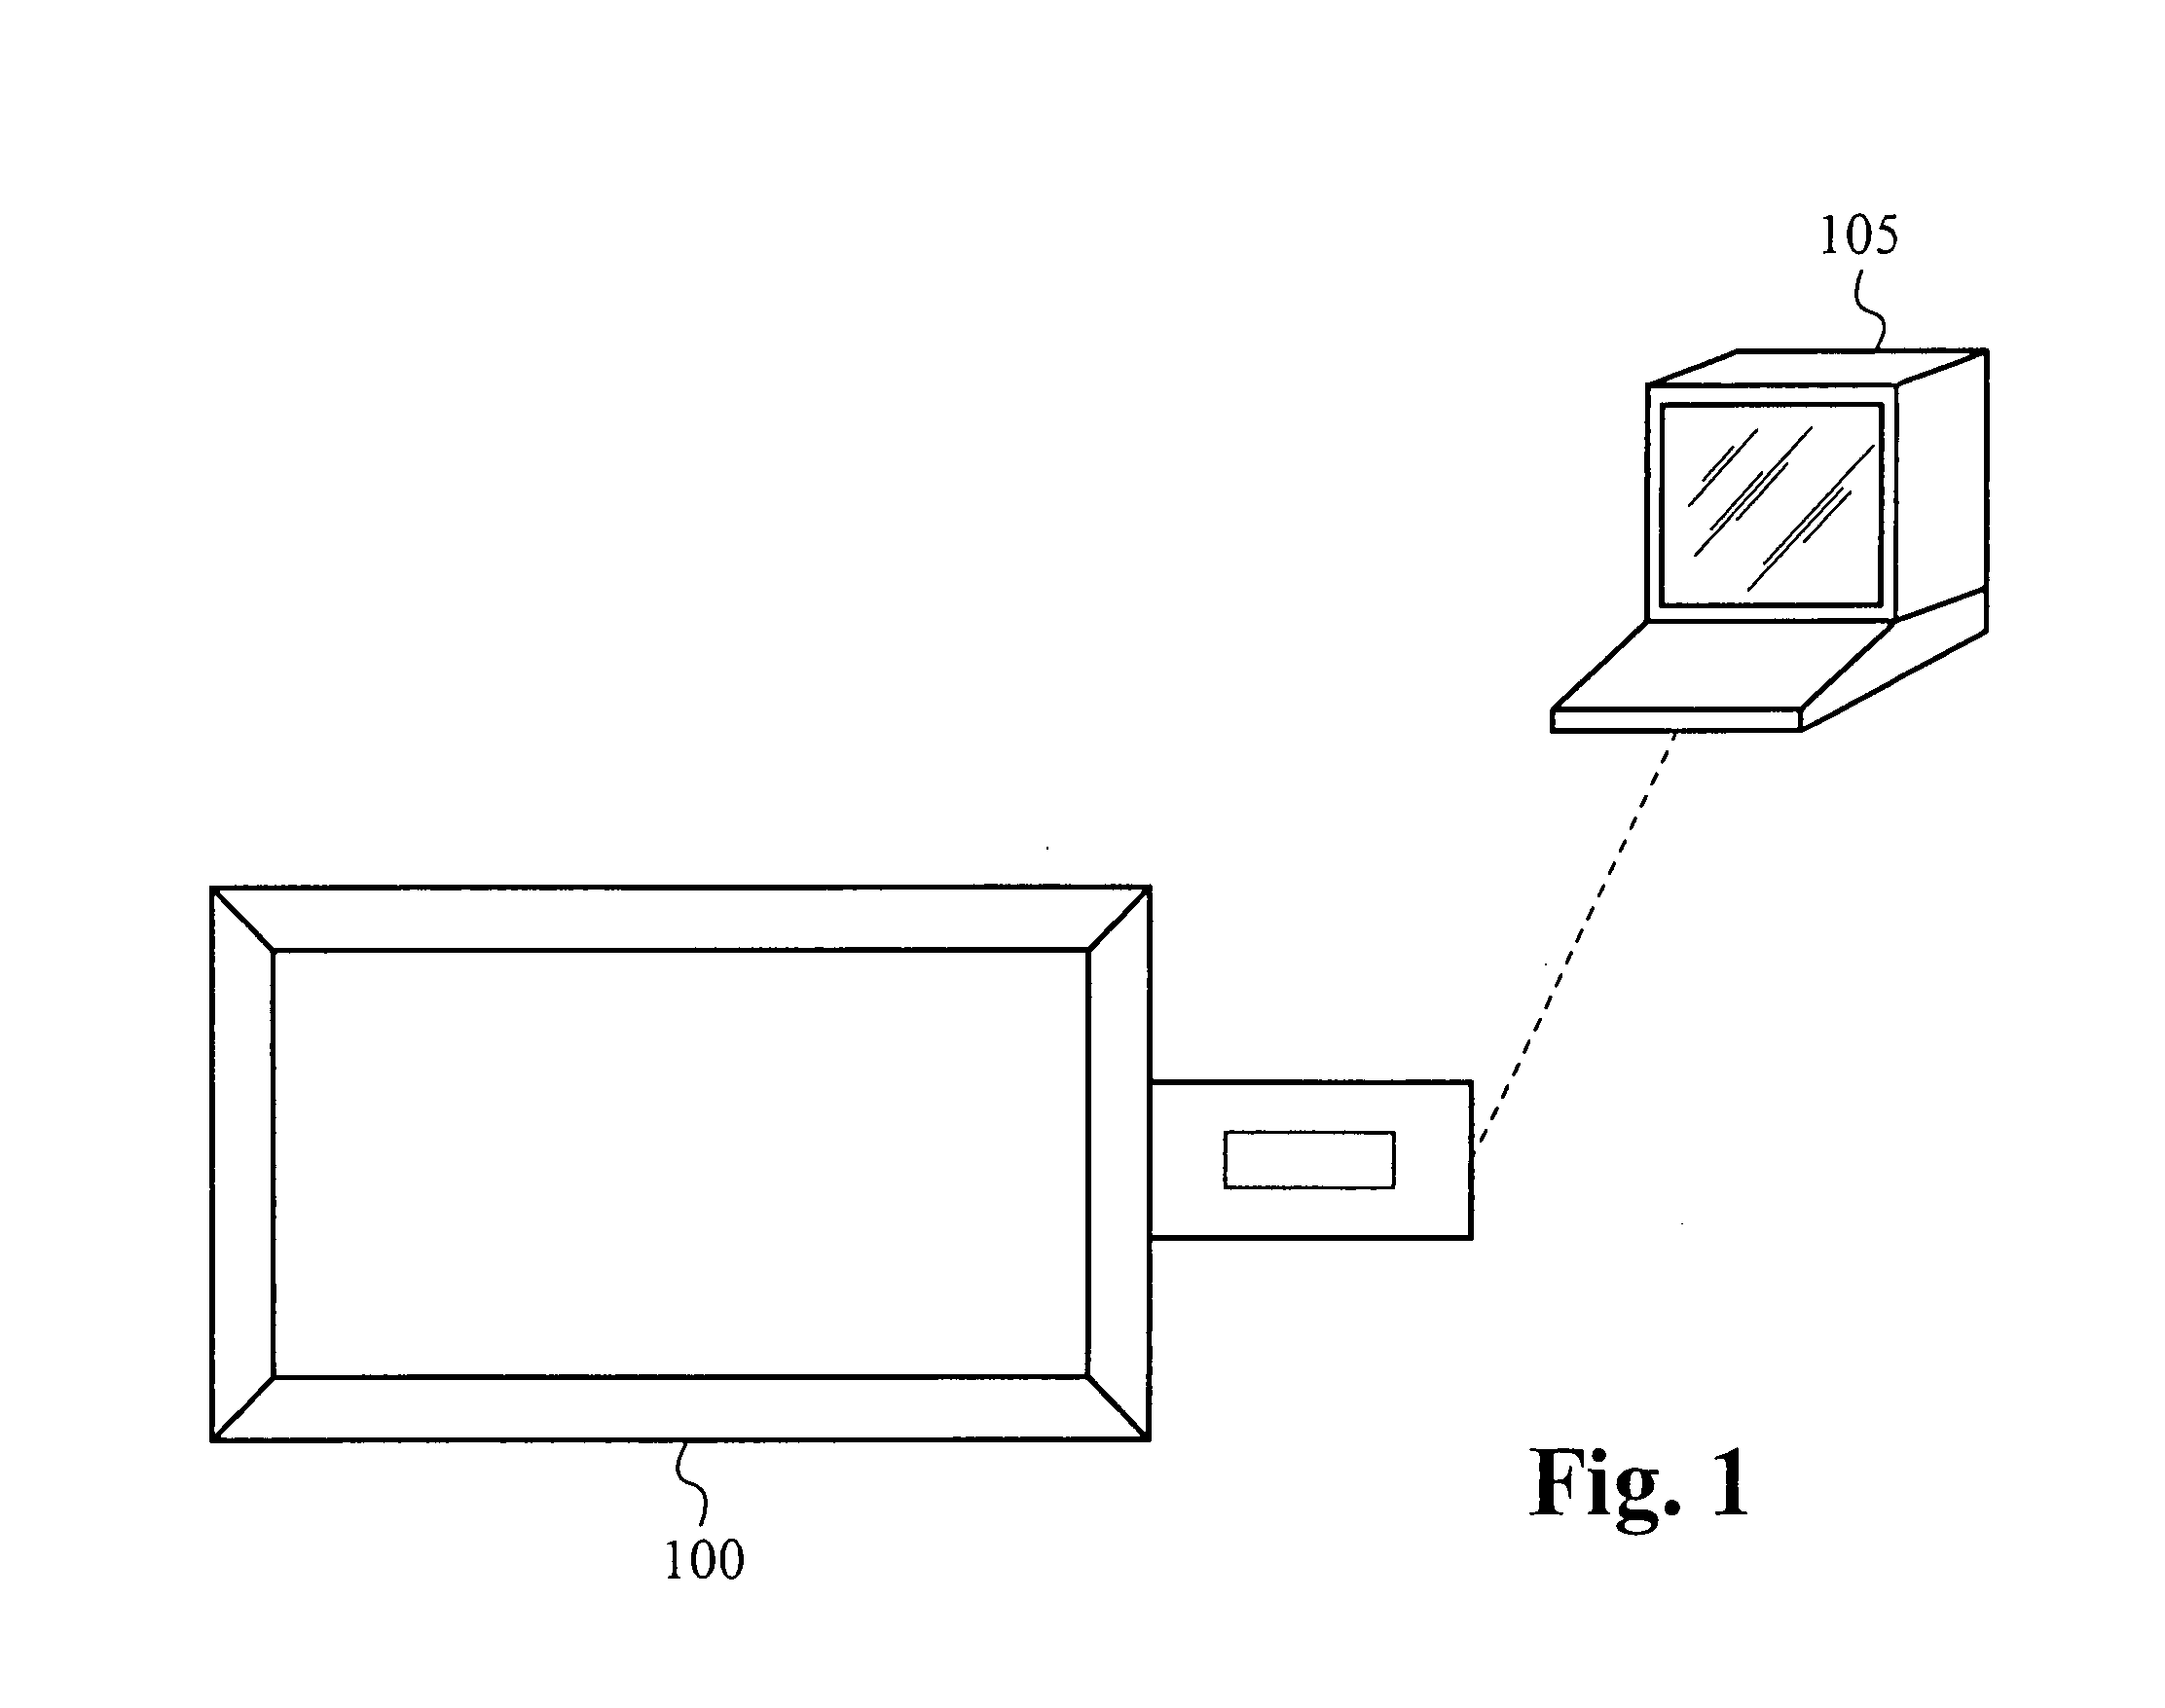 Method and apparatus for providing games and content